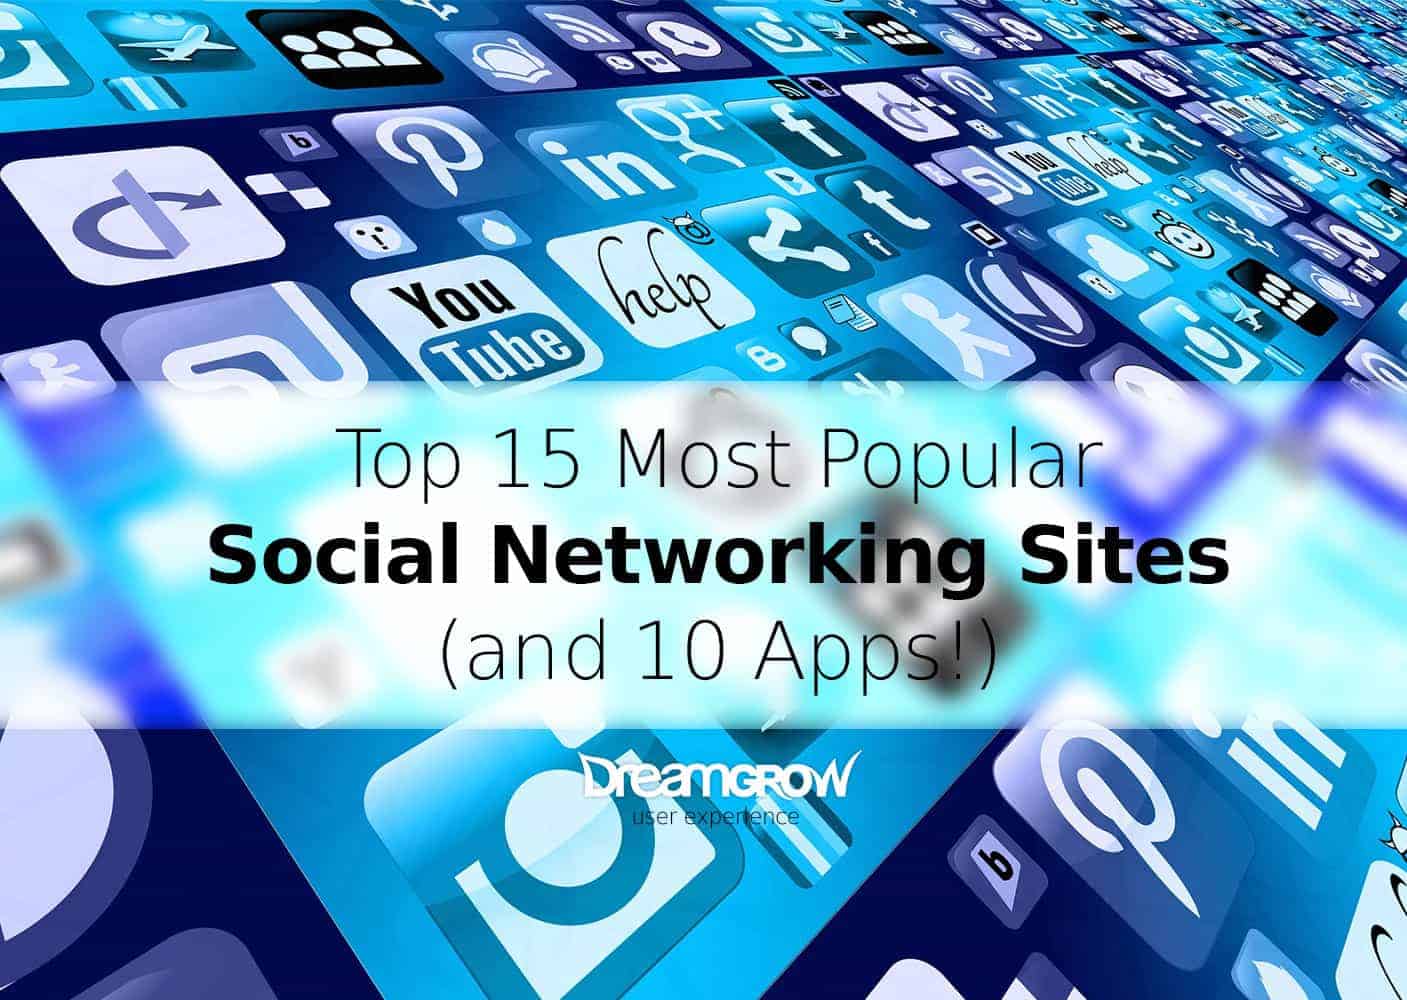 Top 15 Most Popular Social Networking Sites (and 10 Apps!) - DreamGrow